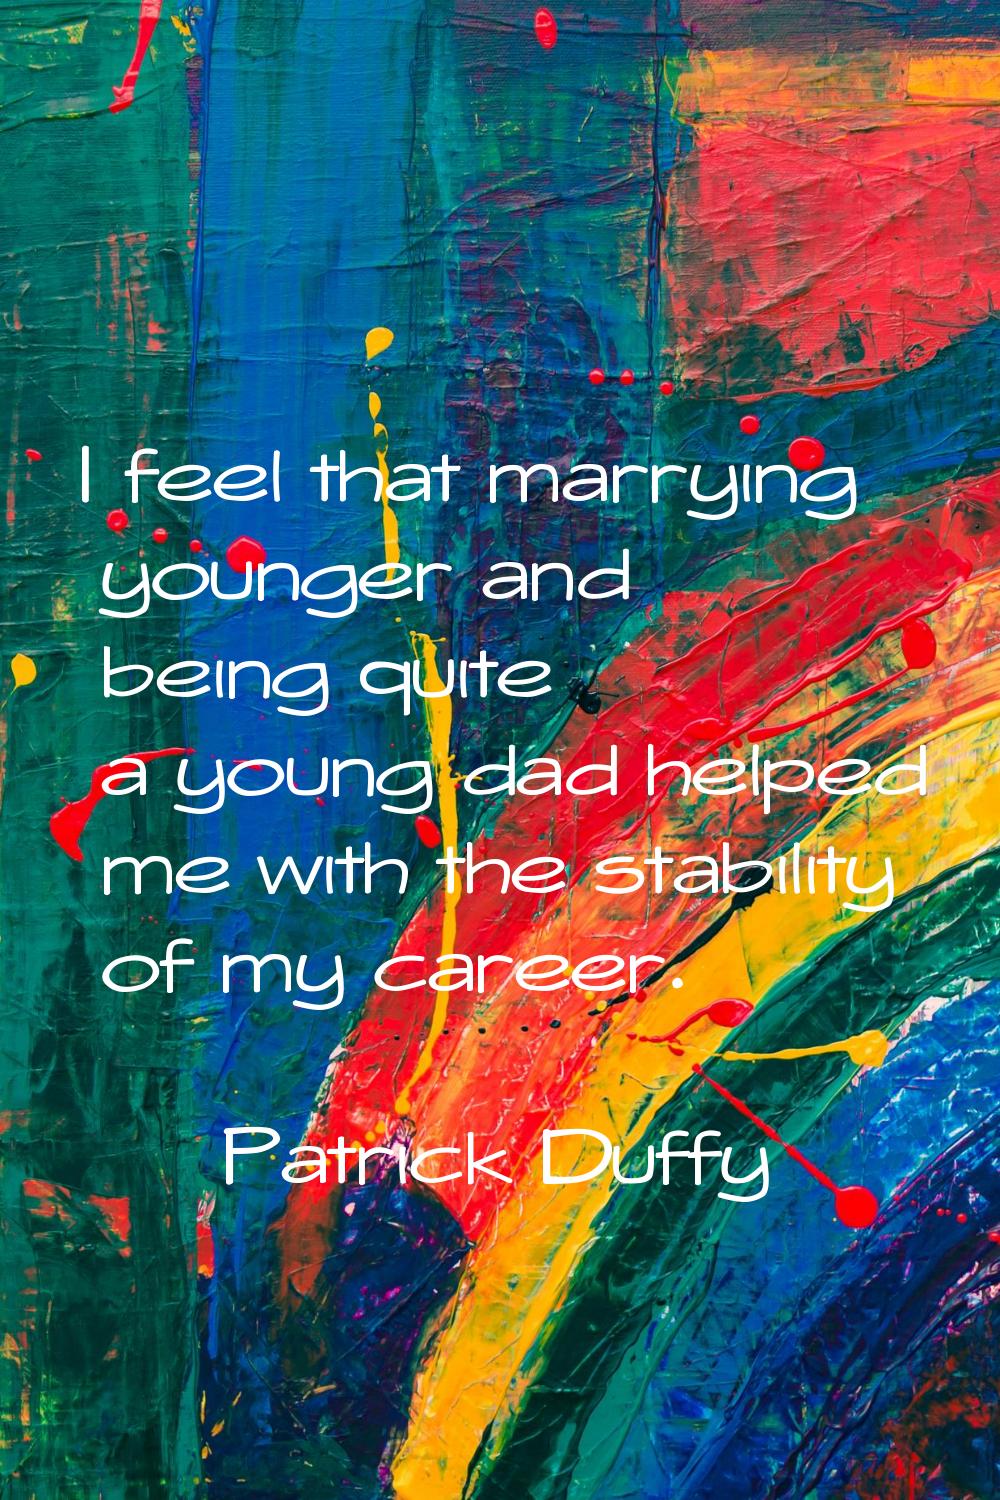 I feel that marrying younger and being quite a young dad helped me with the stability of my career.